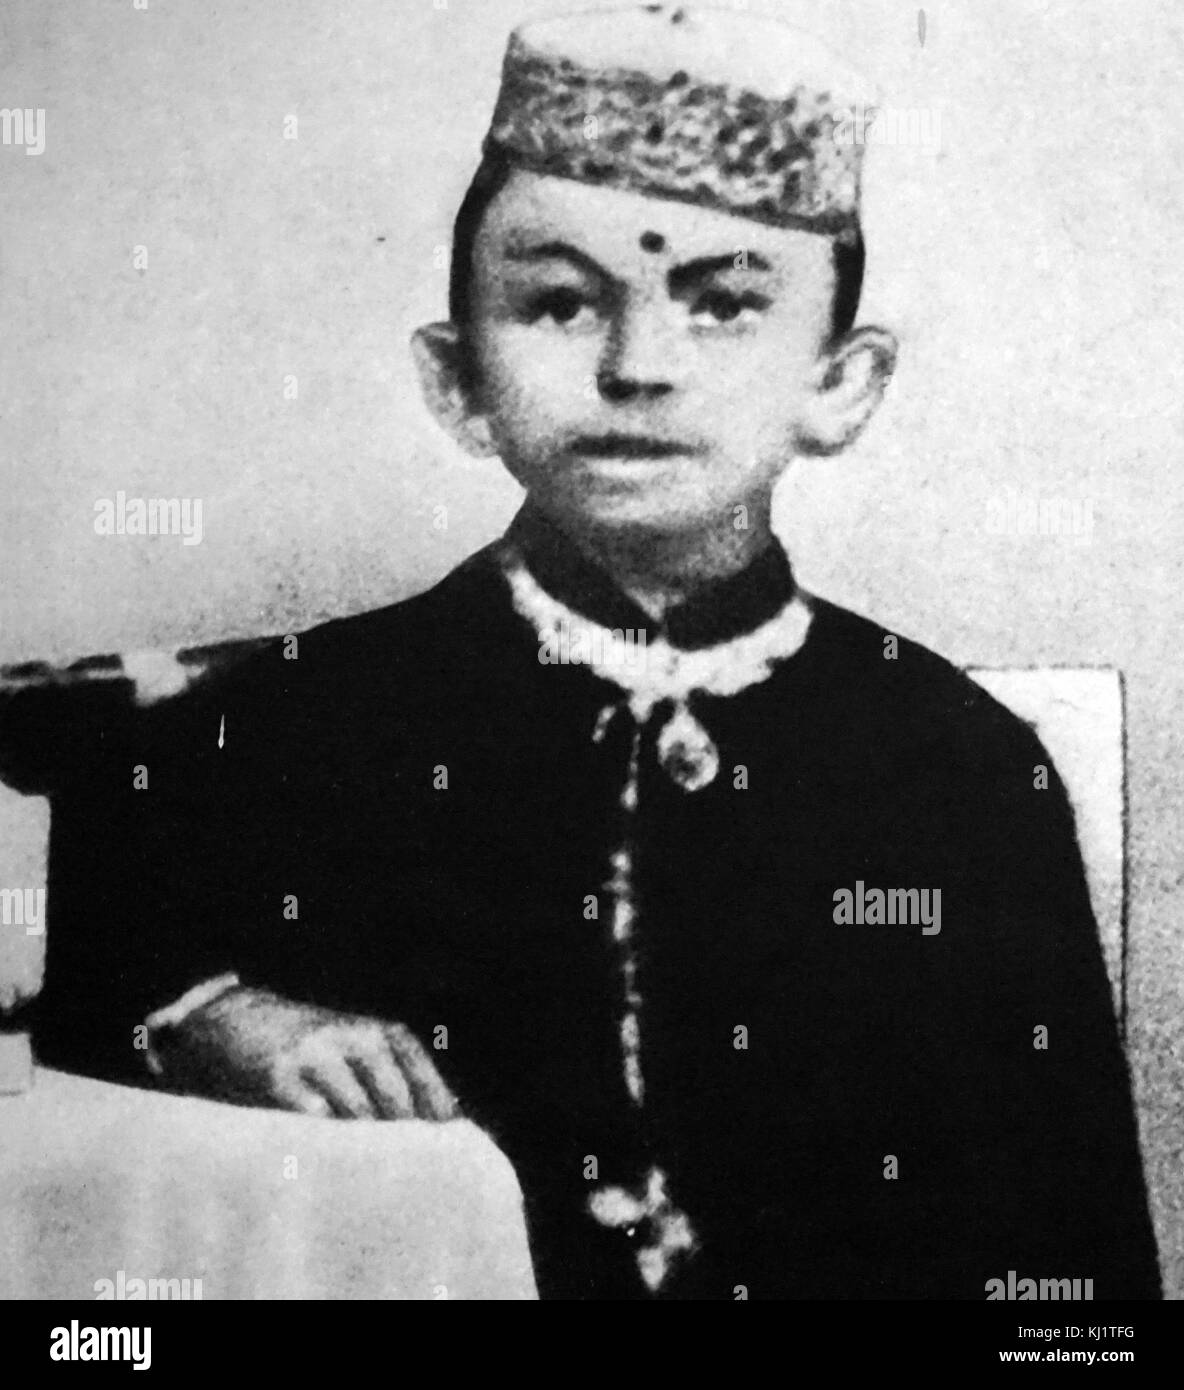 Young Mahatma Gandhi in India 1875, Mohandas Karamchand Gandhi 1869 – 1948), preeminent leader of the Indian independence movement in British-ruled India. Stock Photo